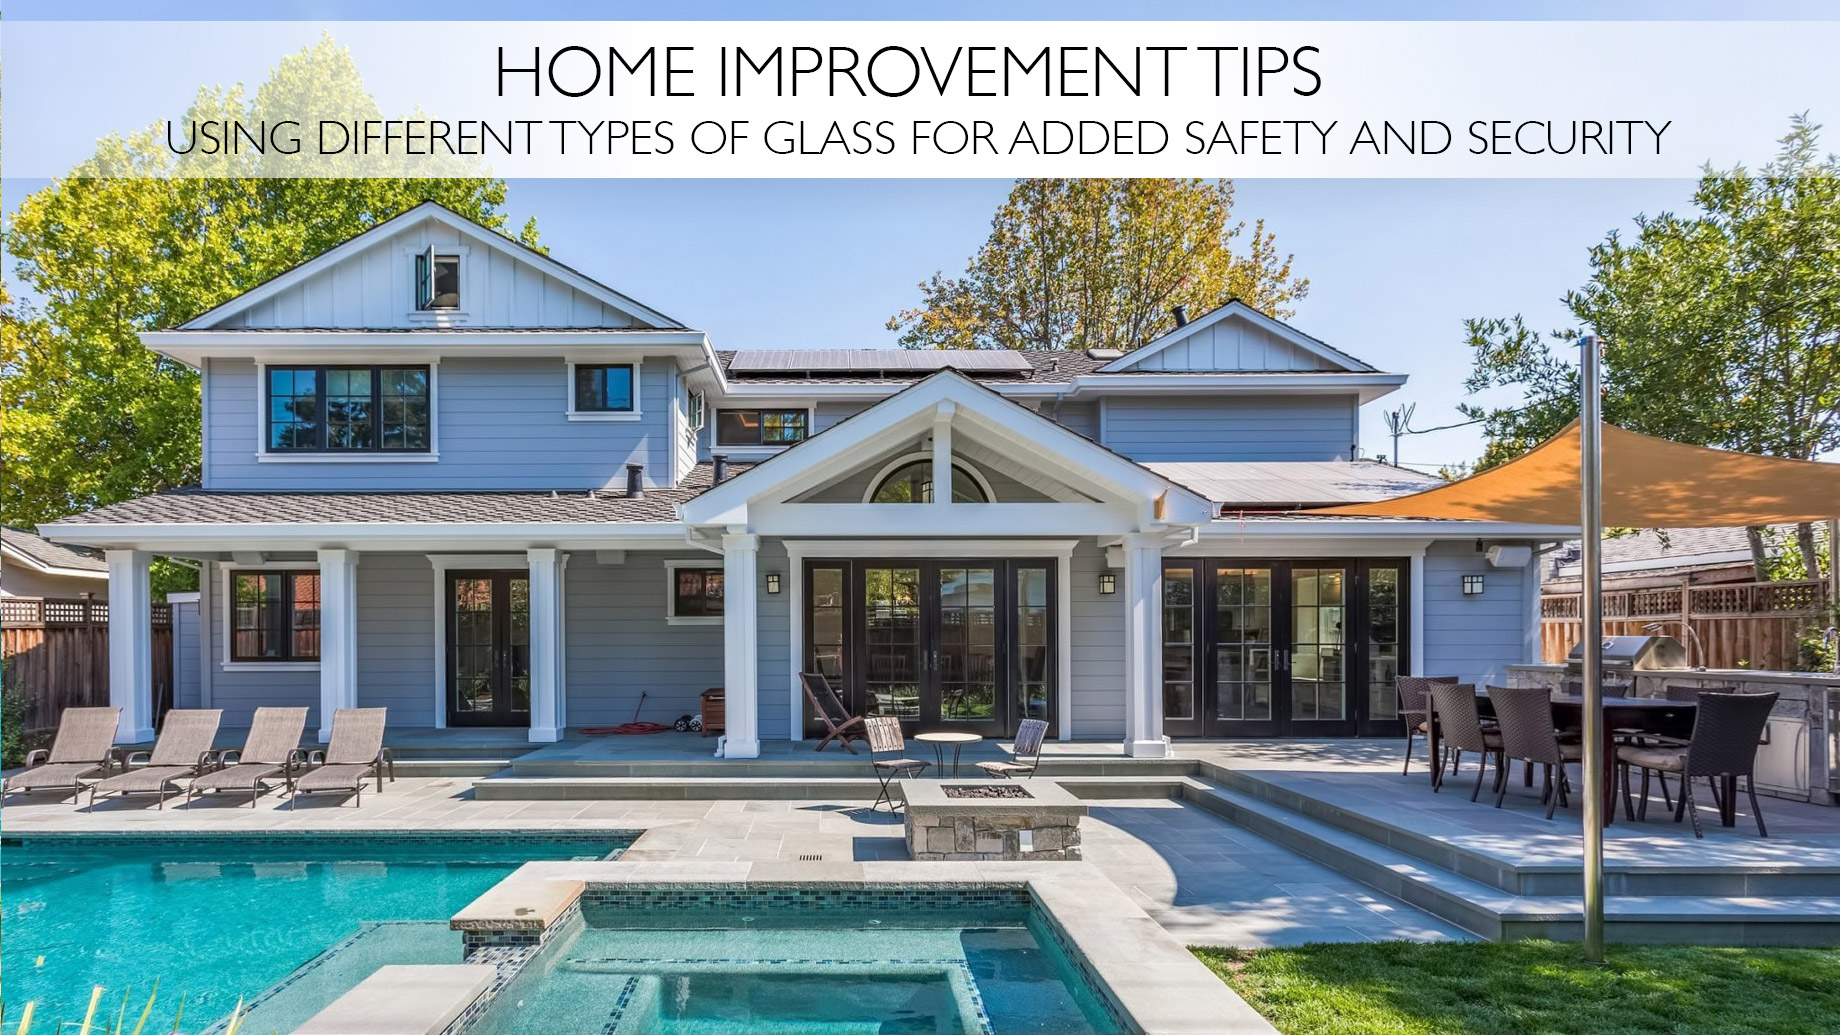 Home Improvement Tips - Using Different Types of Glass For Added Safety and Security